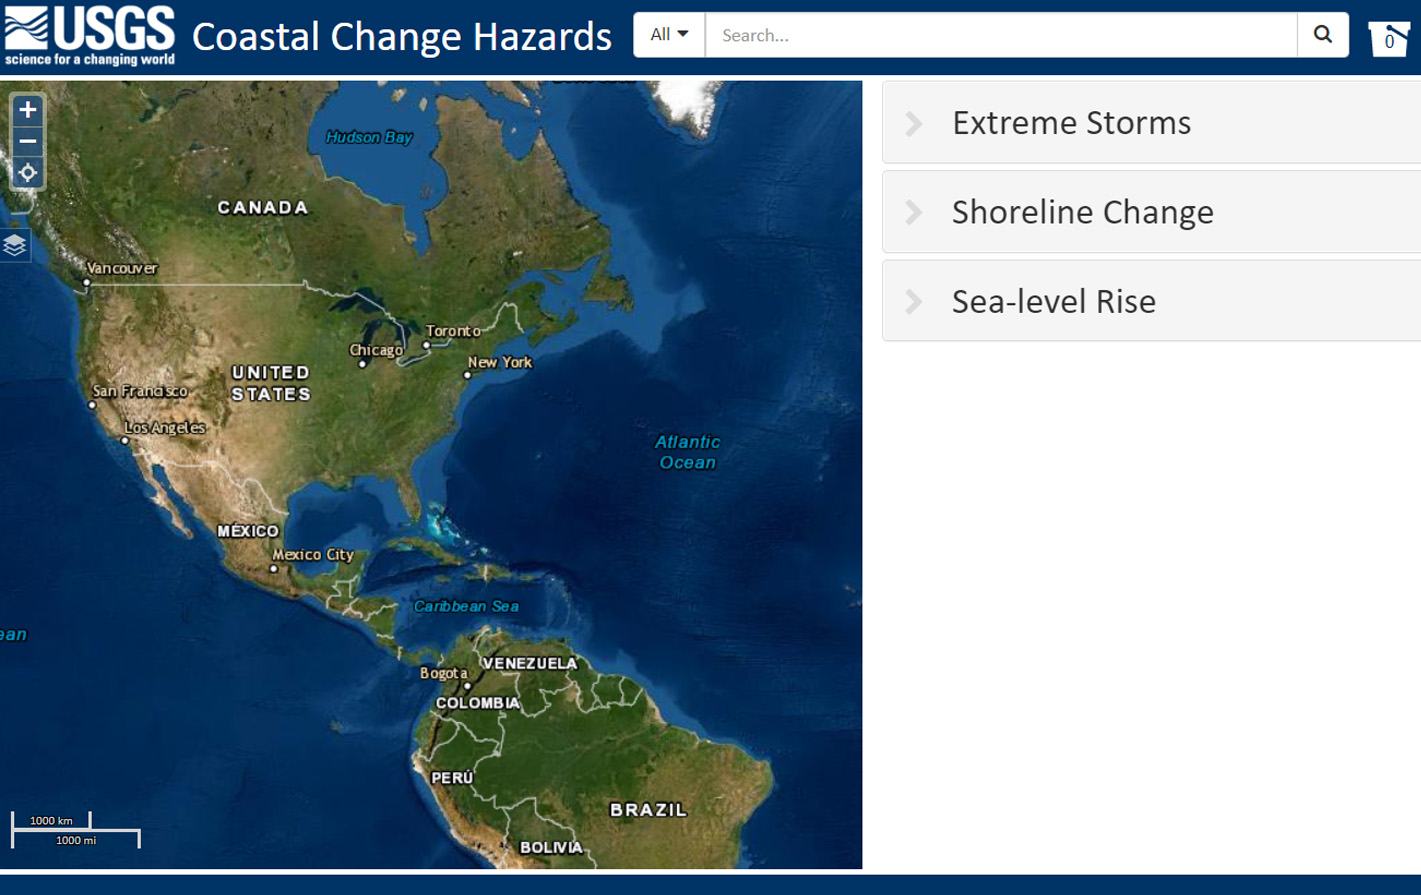 A screenshot of the tool, Coastal Change Hazards Portal, being used.